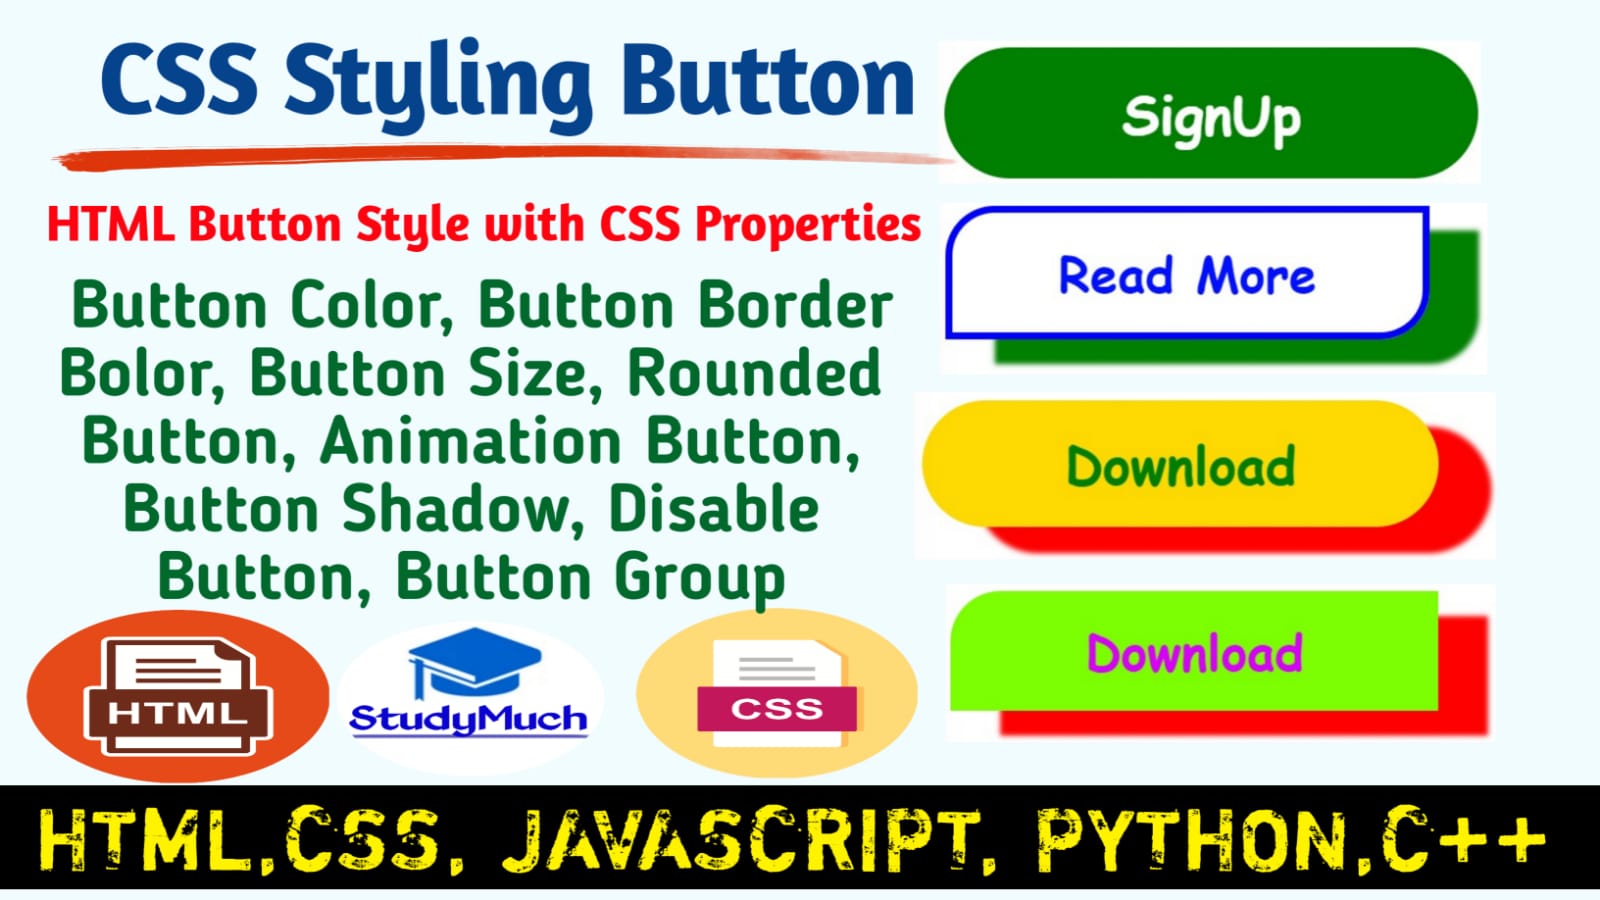 StudyMuch Styling CSS Button